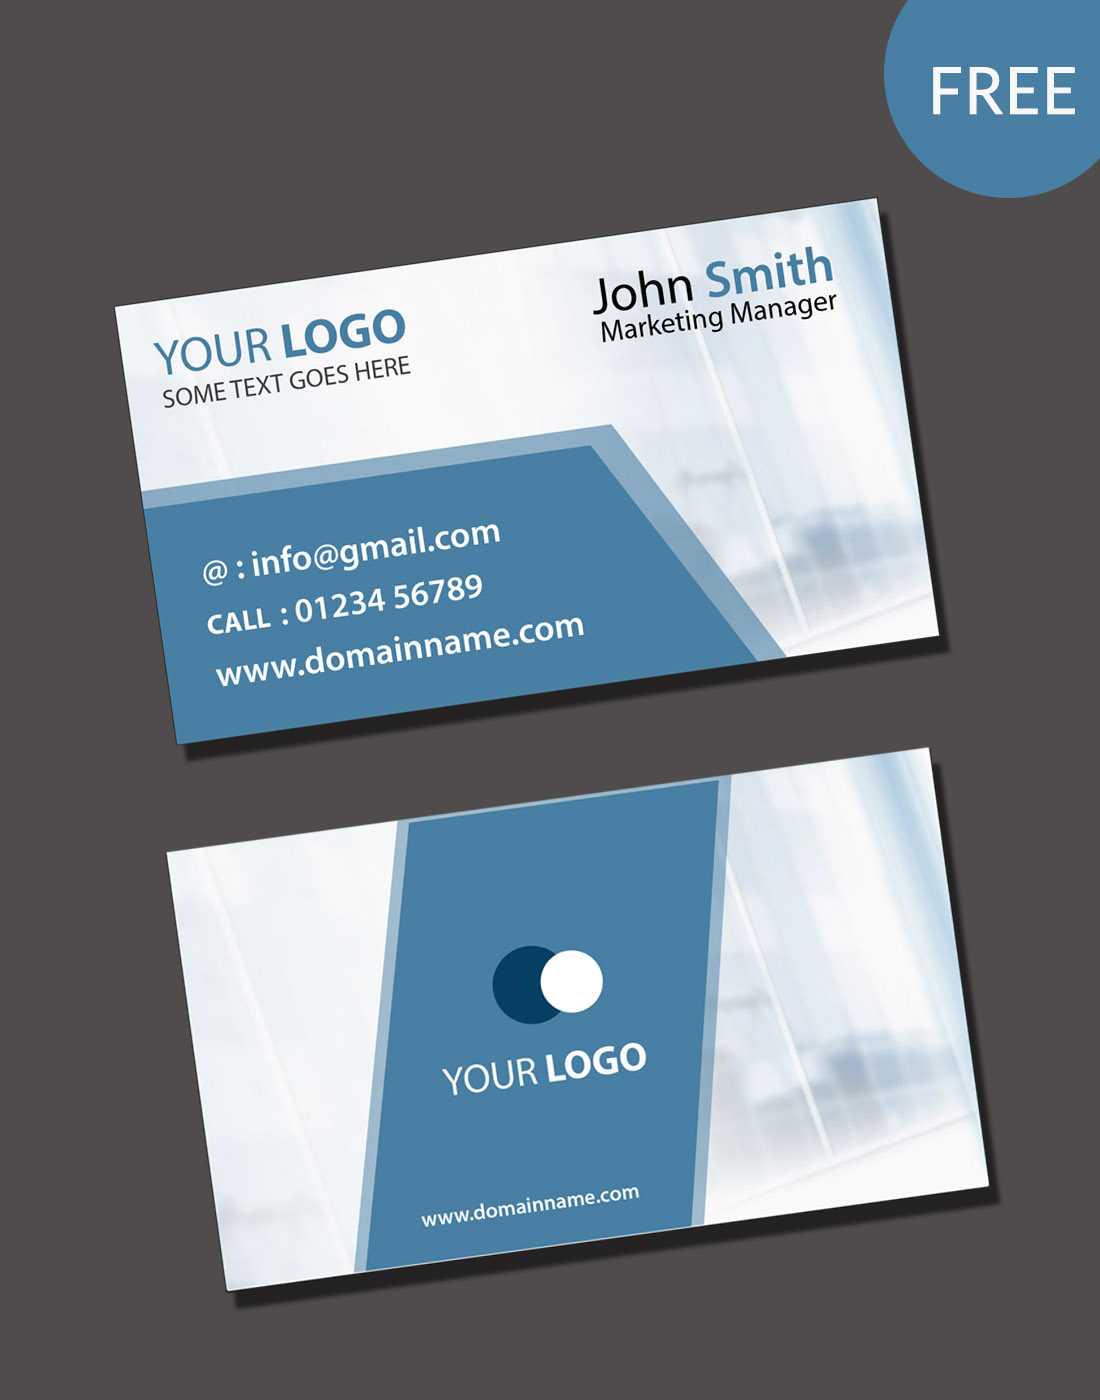 003 Visiting Card Psd Template Free Photoshop Business Blank Intended For Visiting Card Templates Psd Free Download